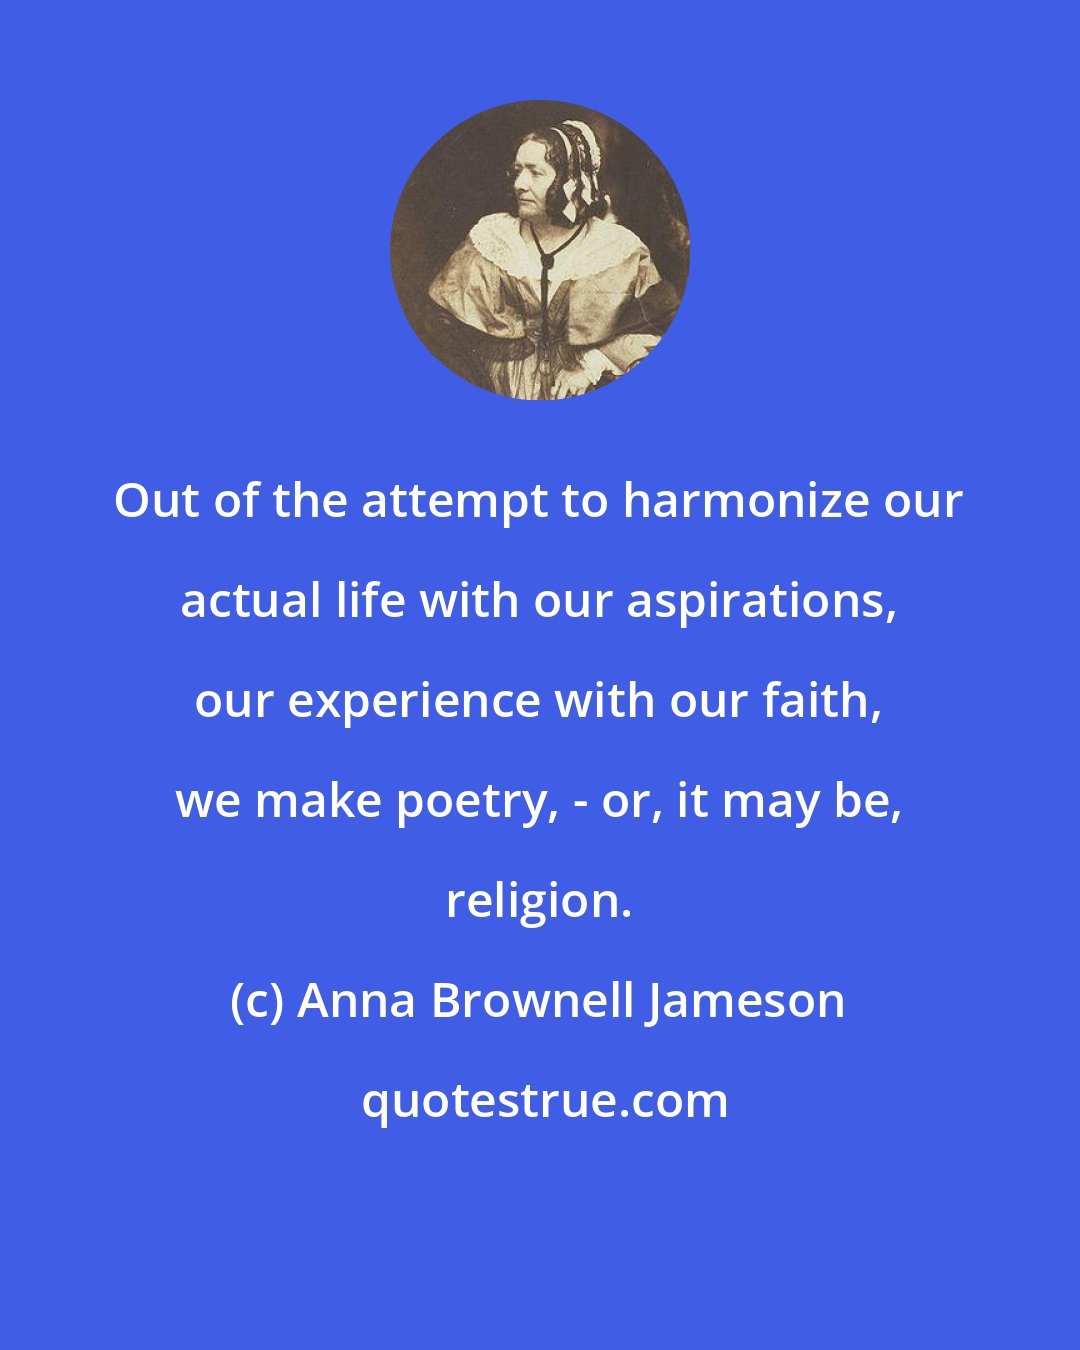 Anna Brownell Jameson: Out of the attempt to harmonize our actual life with our aspirations, our experience with our faith, we make poetry, - or, it may be, religion.